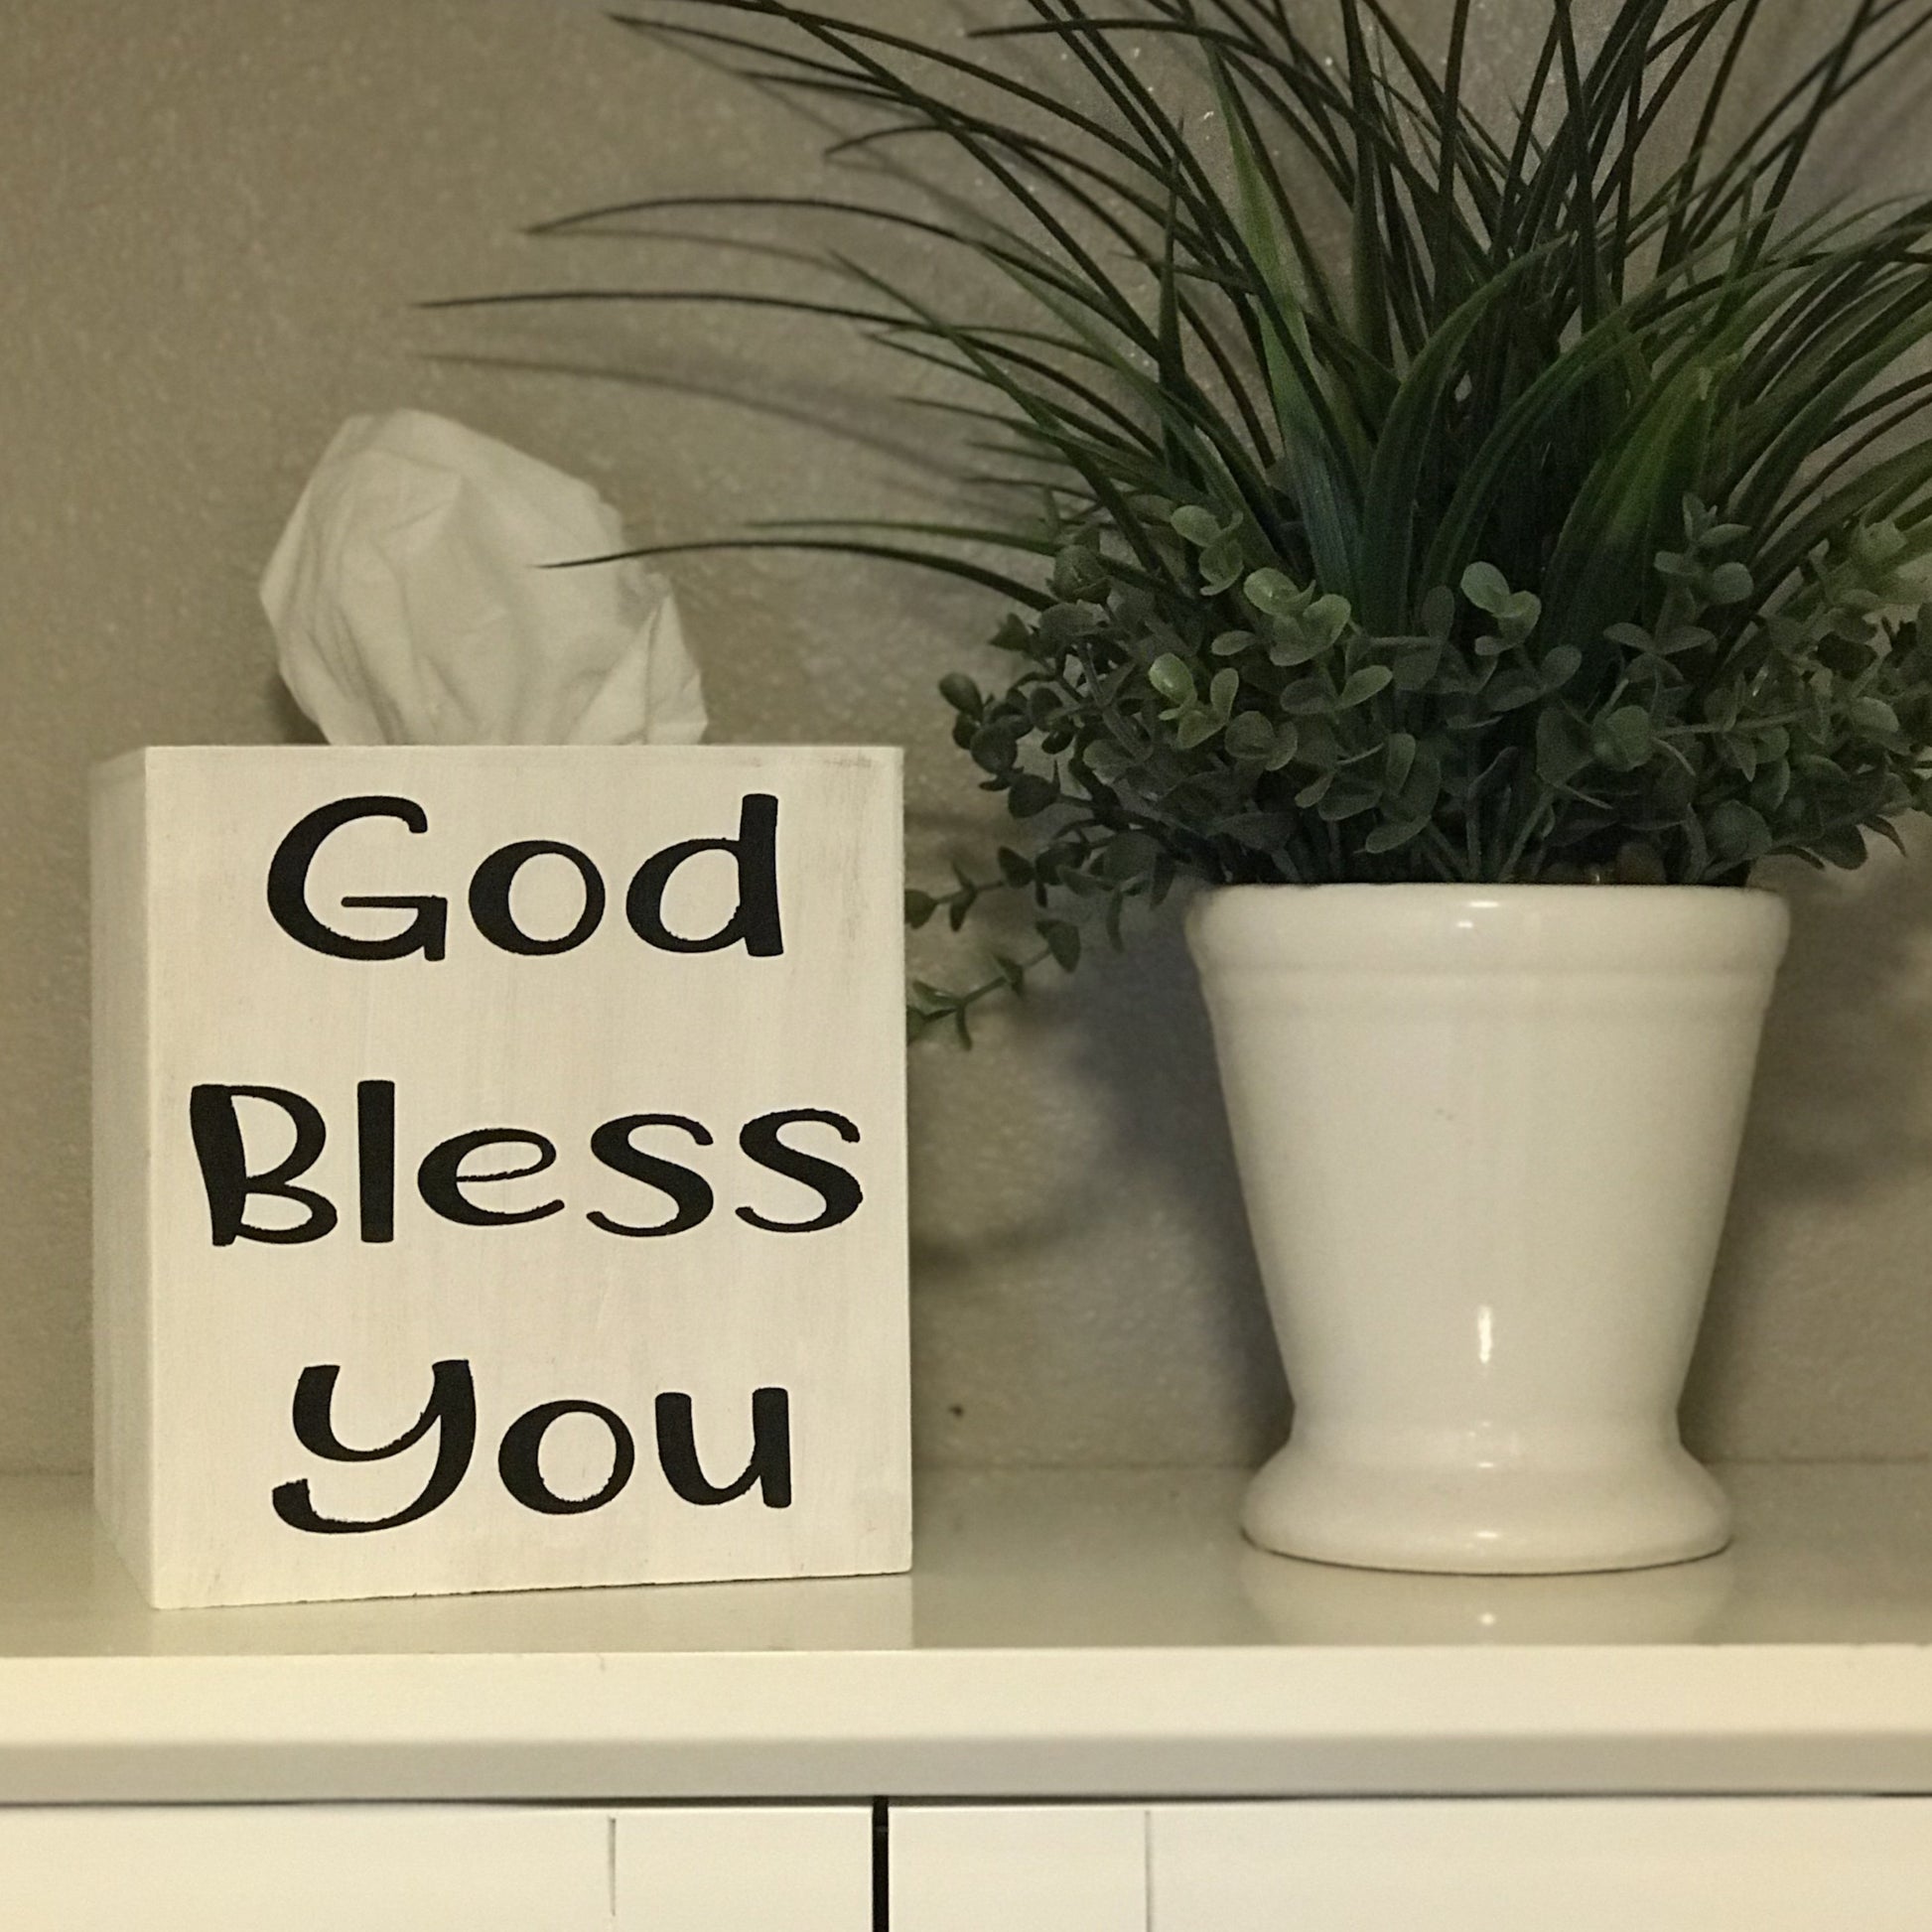 The wooden box measures 5.75 inch x 5.25 inch and will fit any standard size facial tissue box. The box is painted in white. The saying "God Bless You" is painted on in black. Saying is on one side only.